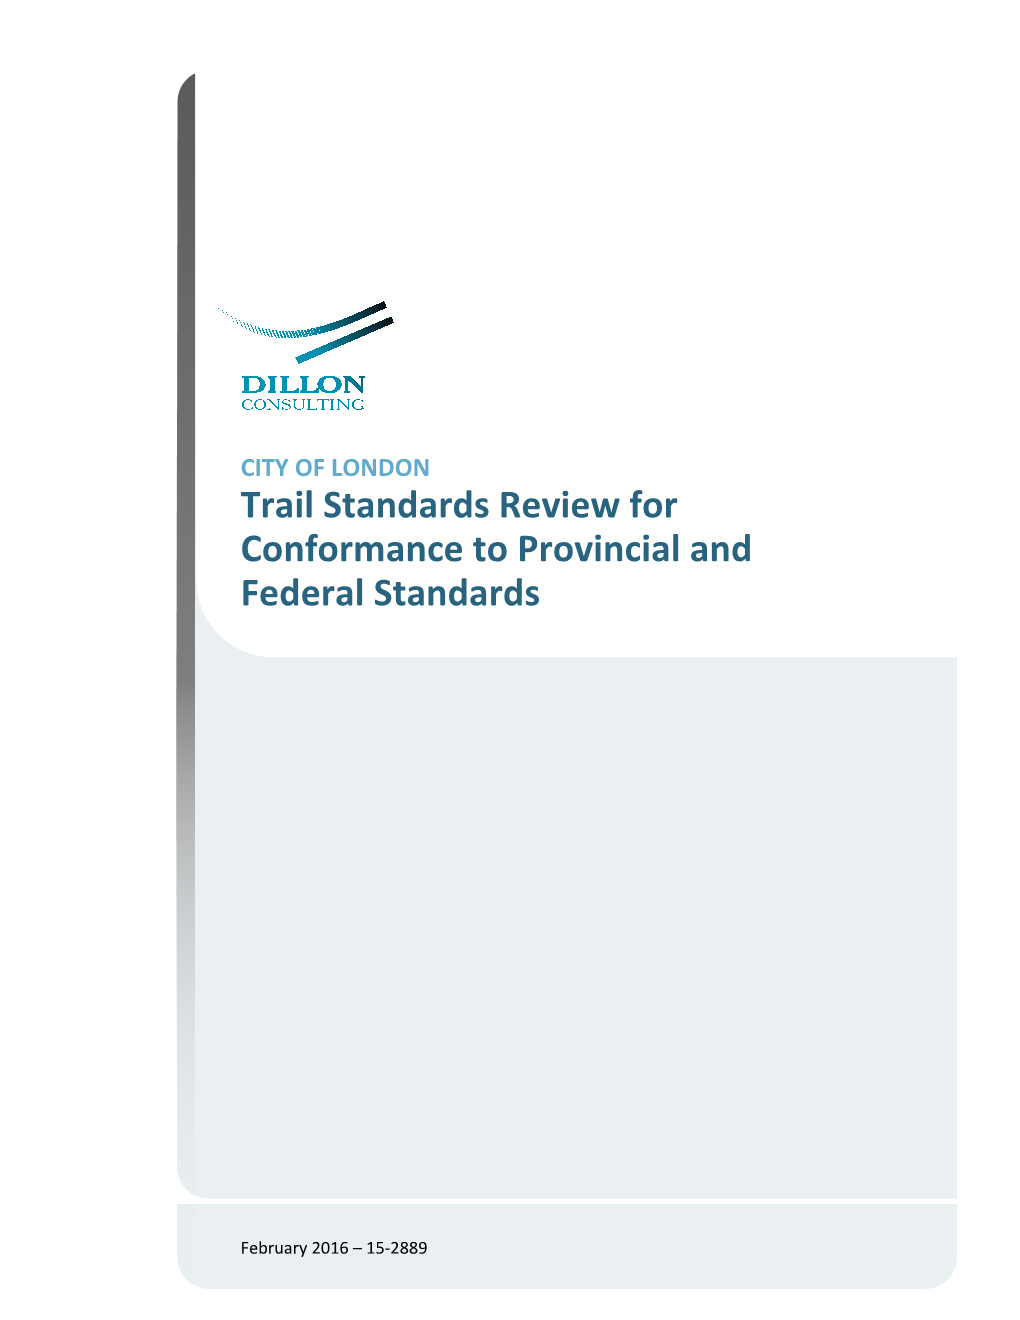 Trail Standards Review for Conformance to Provincial and Federal Standards